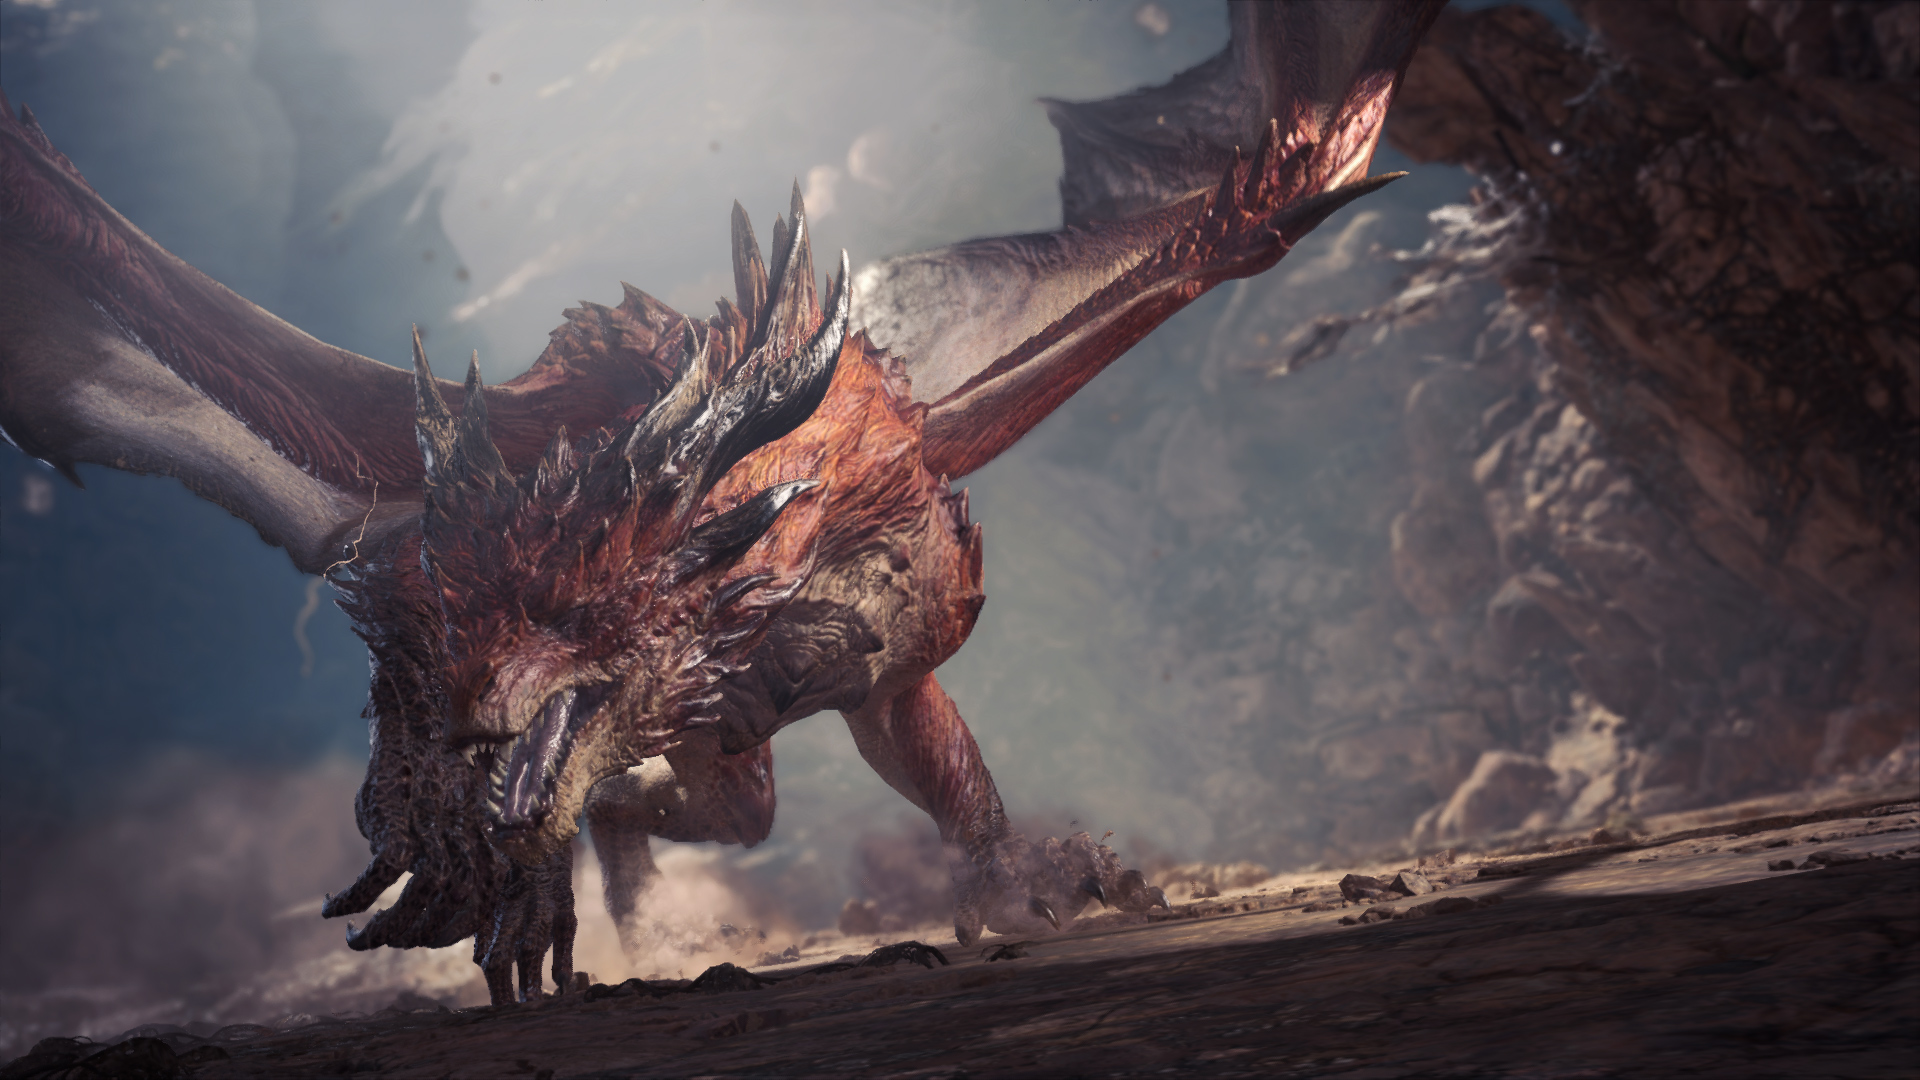 Monster Hunter World Iceborne starting requirements: How to start Iceborne  and get the free Guardian Armour